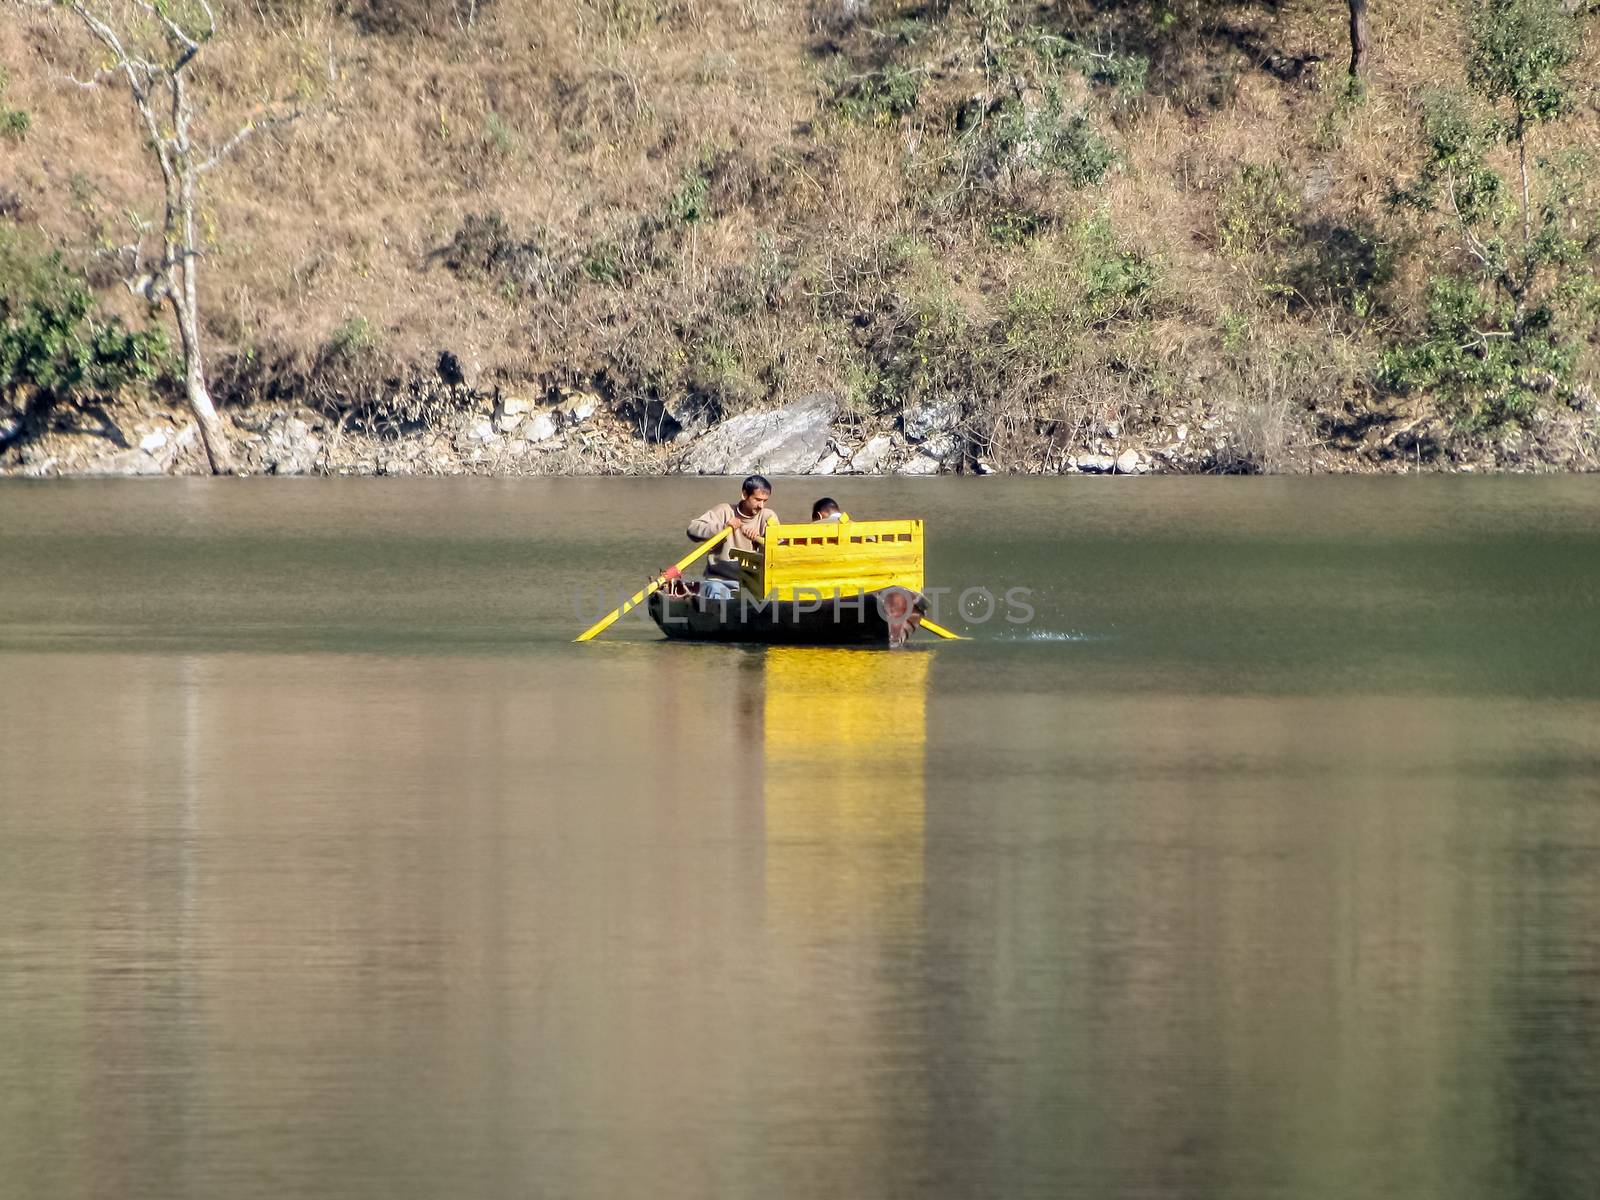 Boatman with tourist rowing his small yellow boat in waters of Bhimtal lake. by lalam